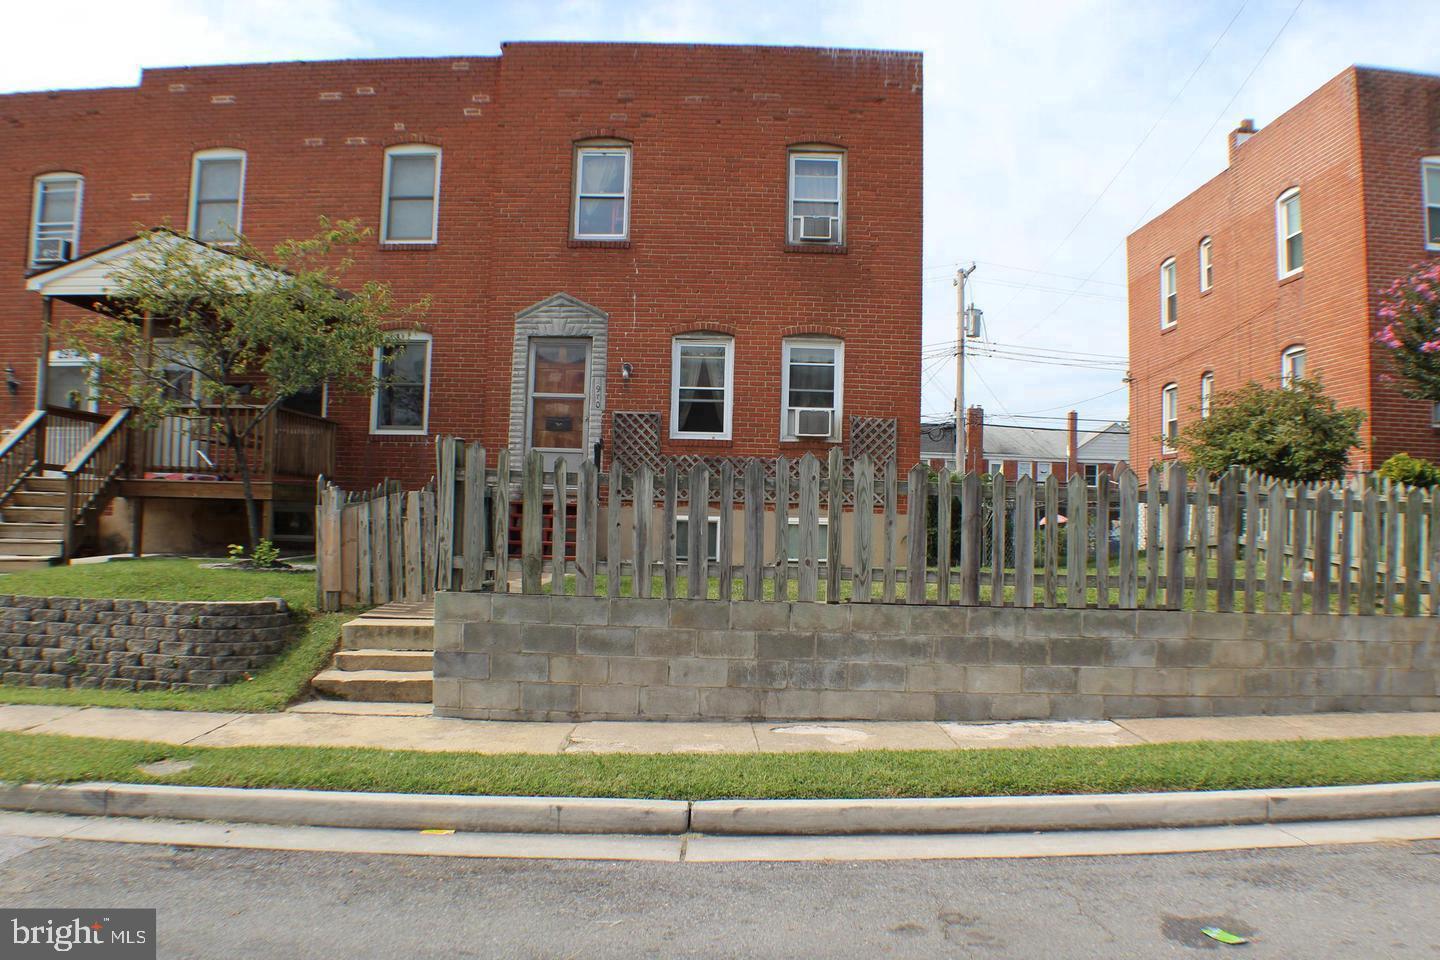 a view of a brick building next to a yard